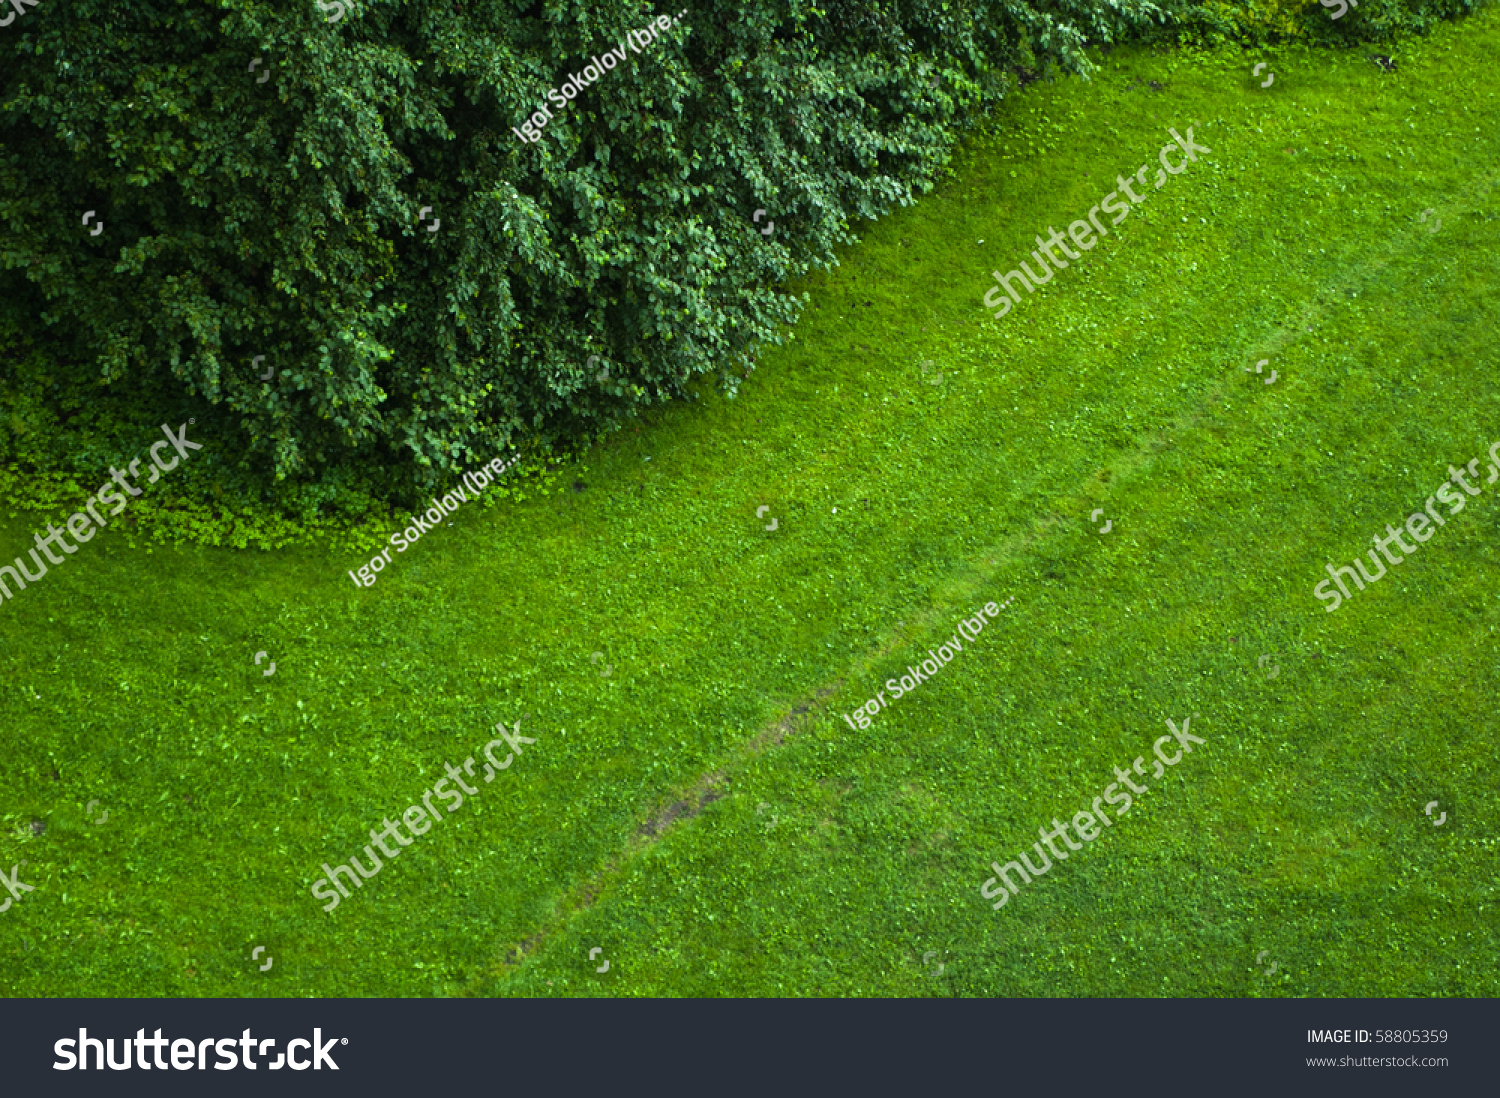 Top View On Green Lawn Stock Photo 58805359 - Shutterstock